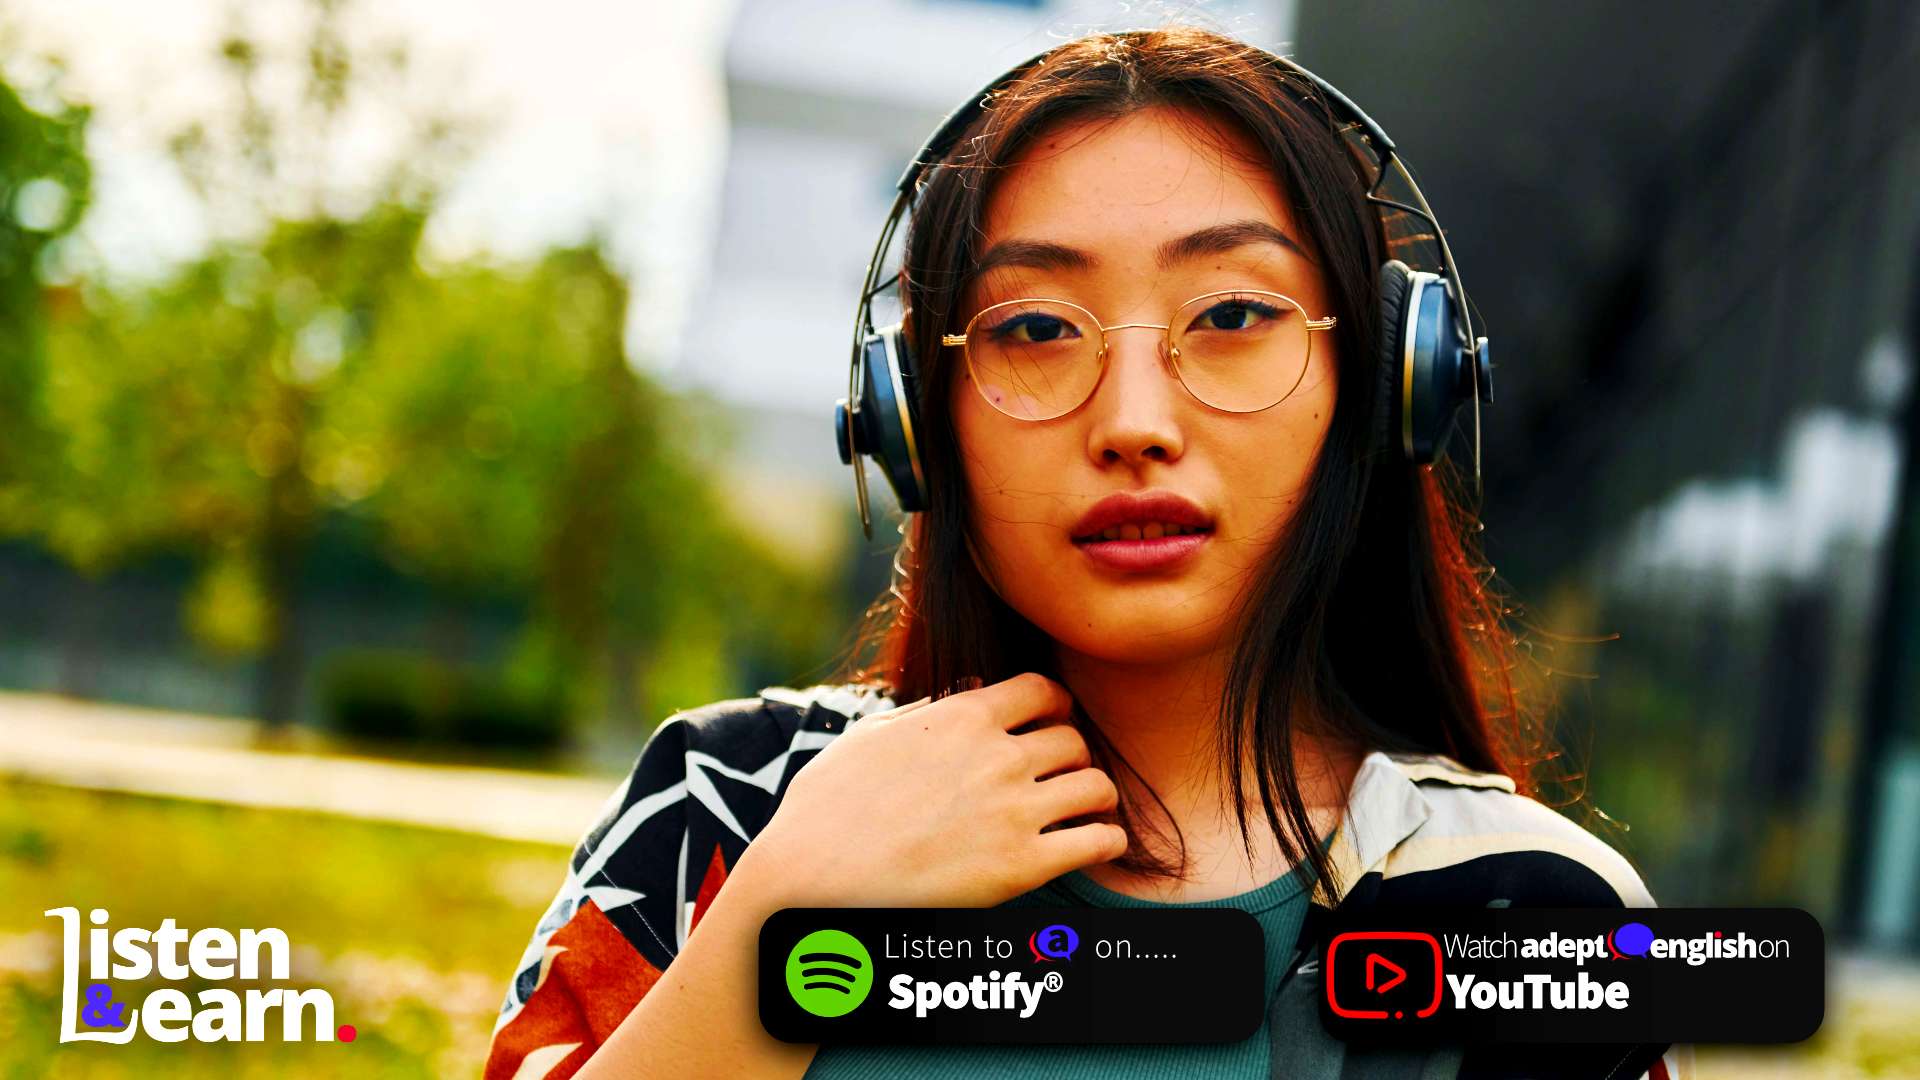 A photo of a young woman listening to English podcasts. Improve your spoken English fluency today! Listen and speak with our English listening practice lesson! #LearnEnglish #FluentEnglish